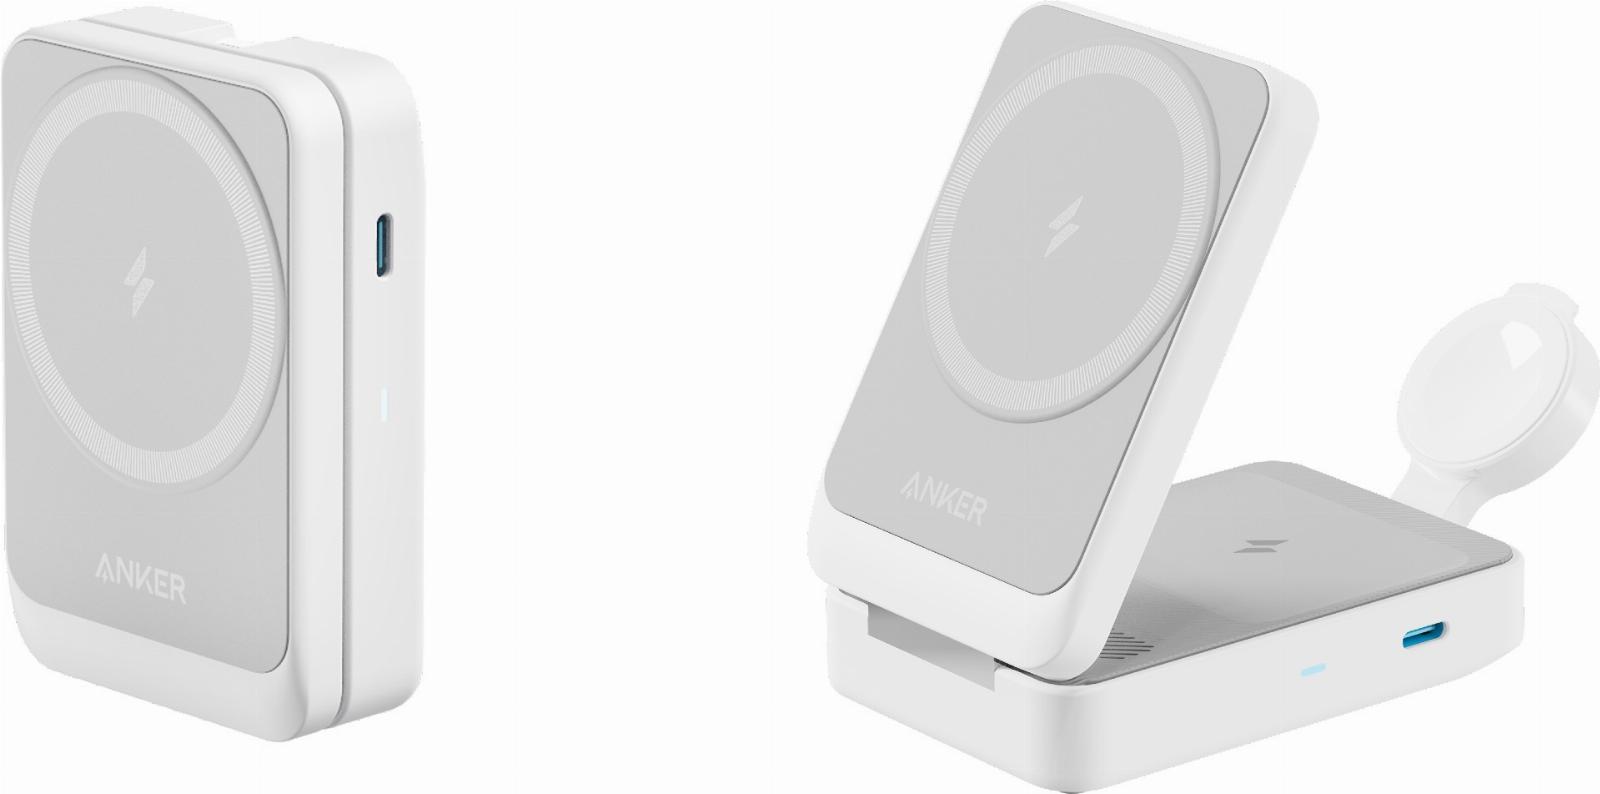 Anker introduces some clever new travel chargers